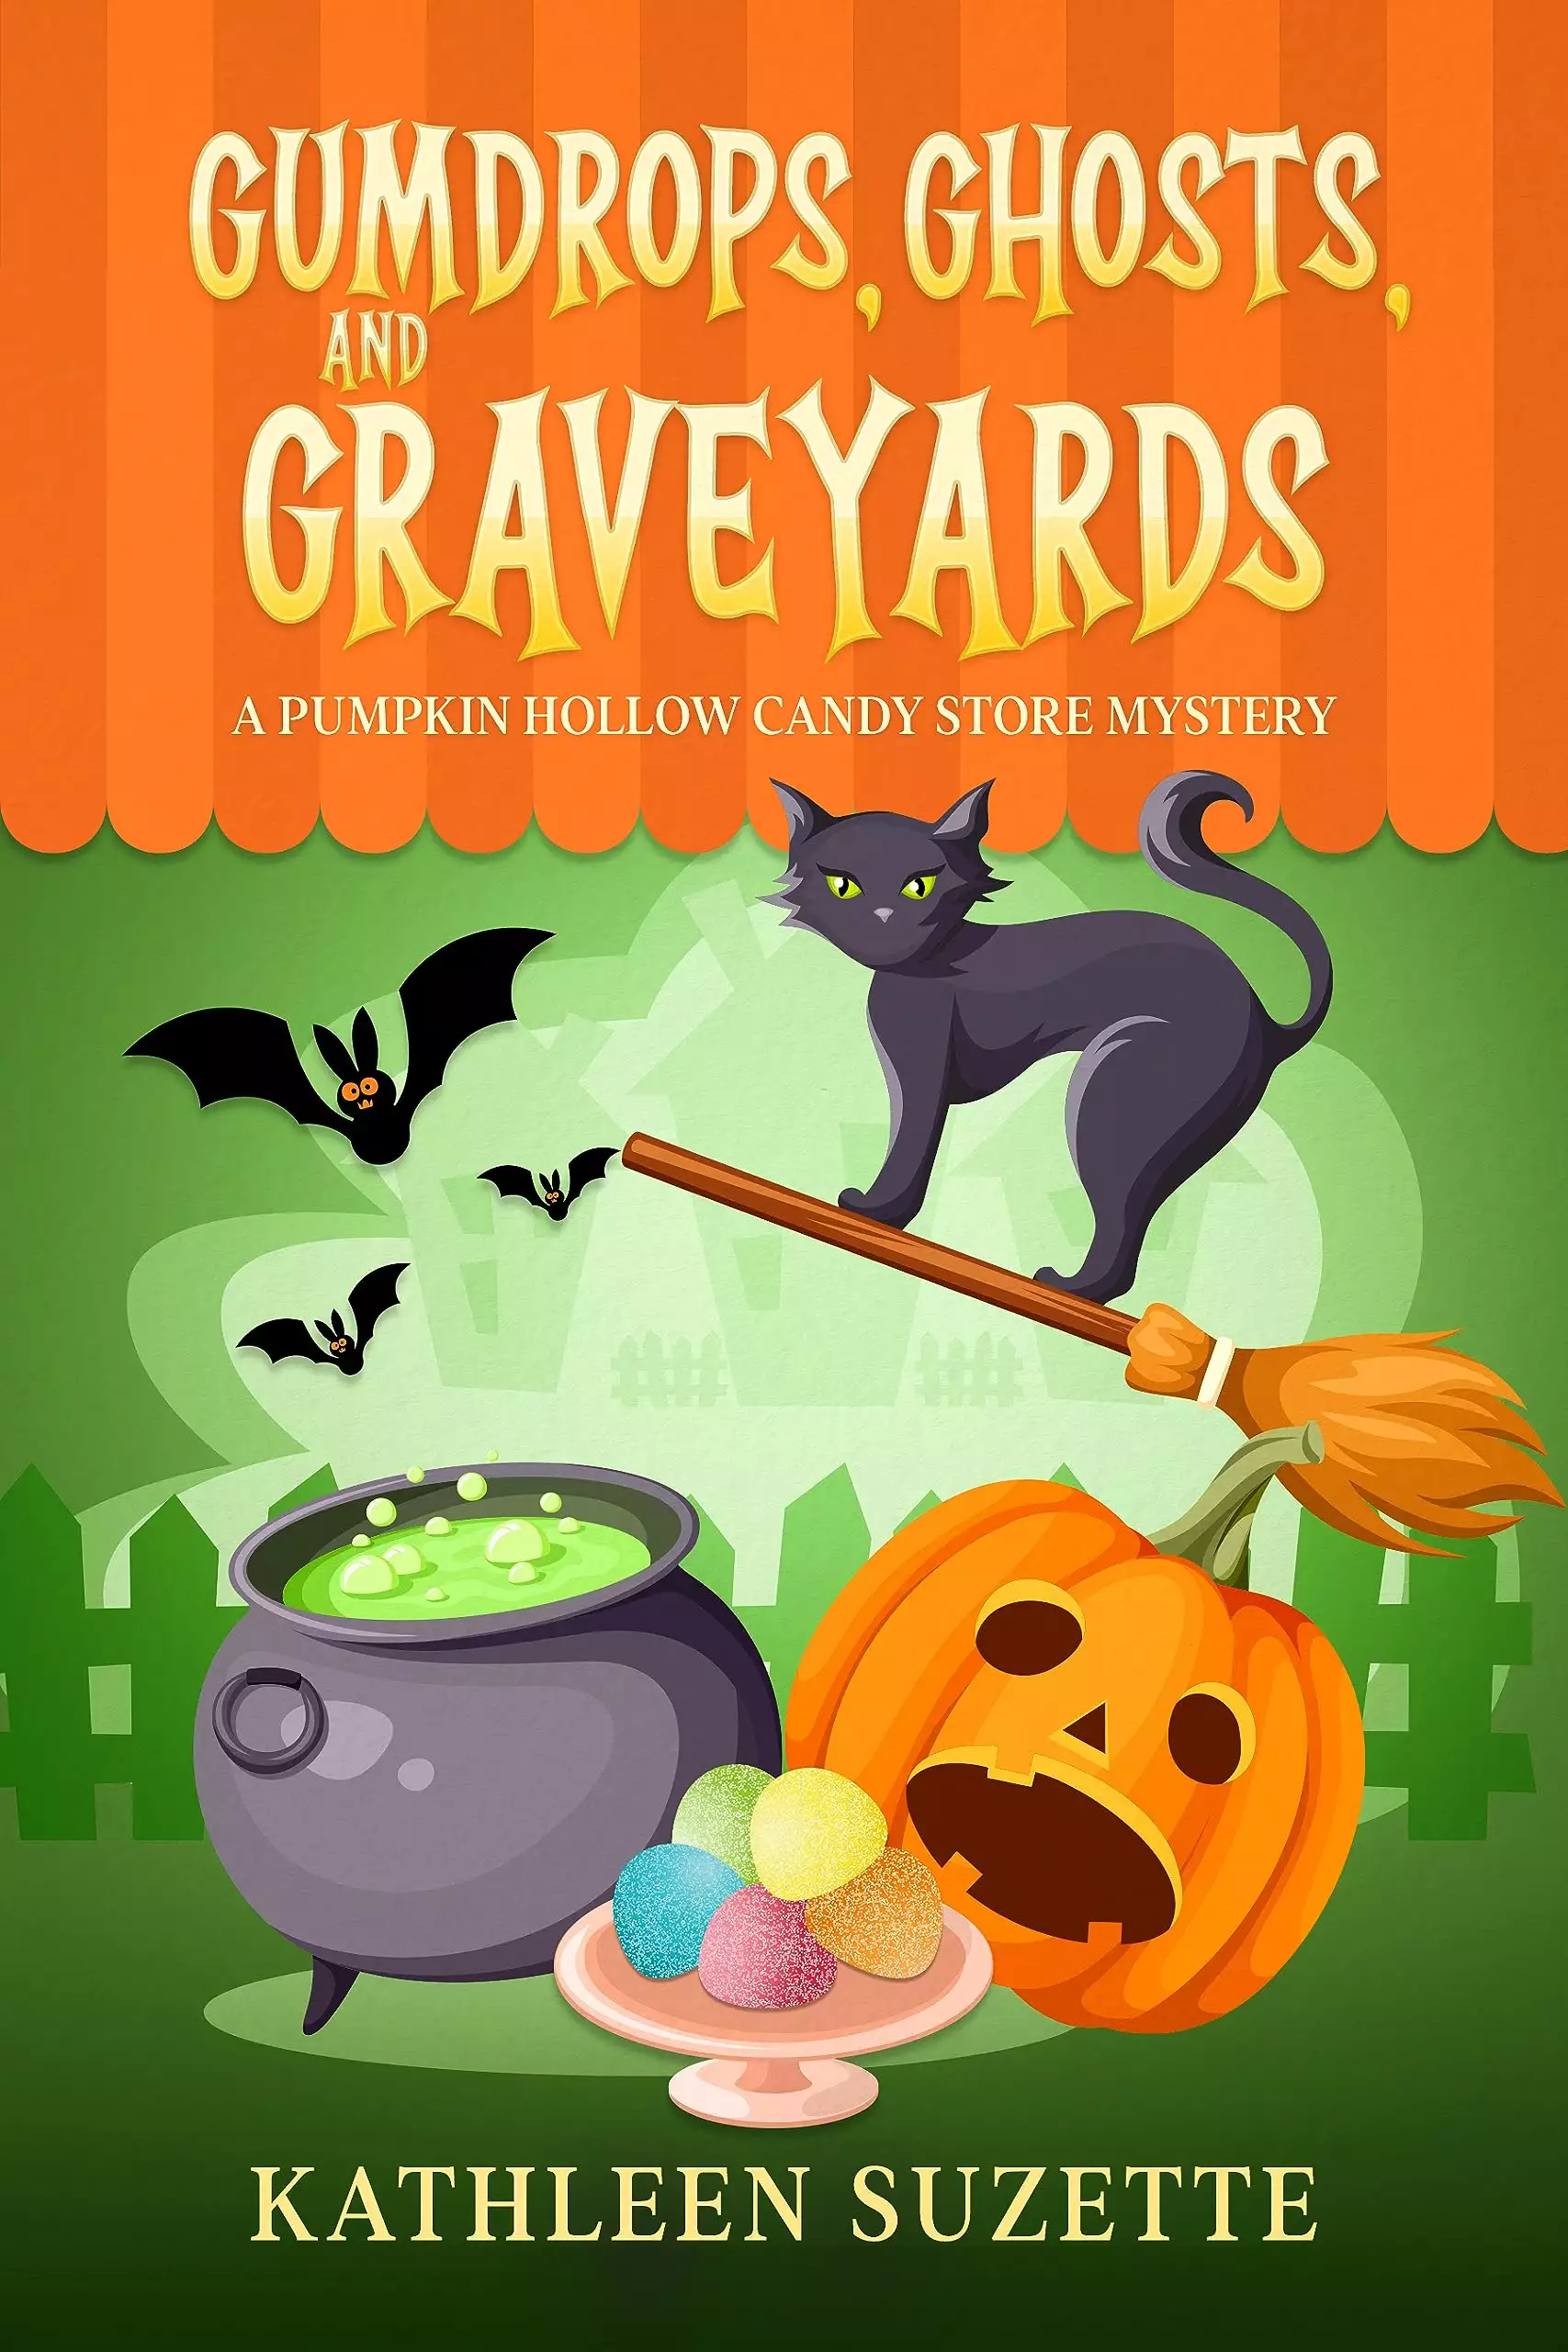 Gumdrops, Ghosts, and Graveyards: A Pumpkin Hollow Candy Store Mystery